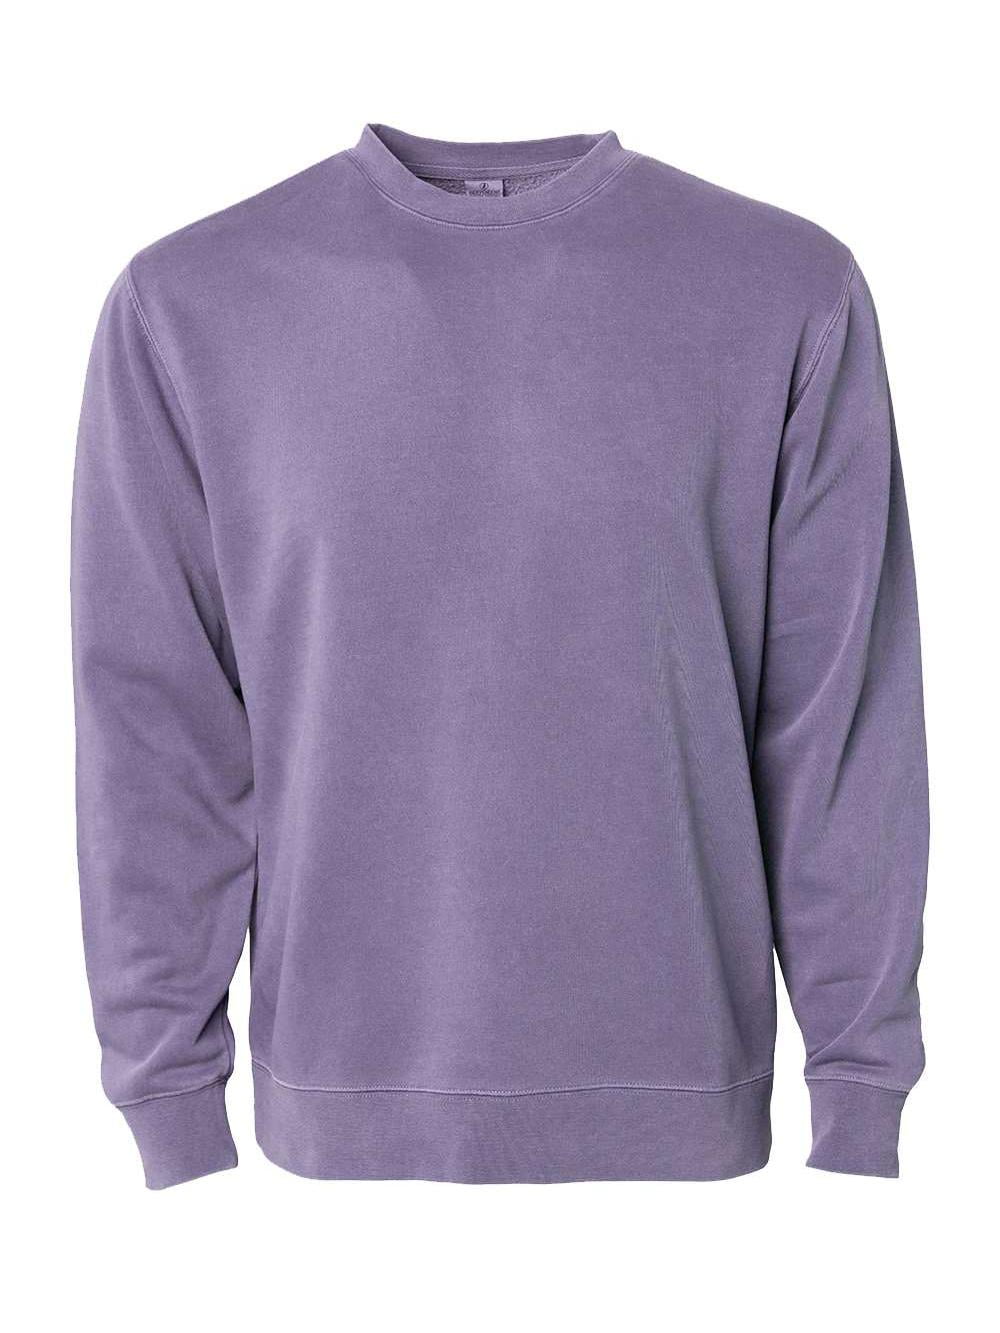 Independent Trading Co. - Unisex Midweight Pigment-Dyed Crewneck ...